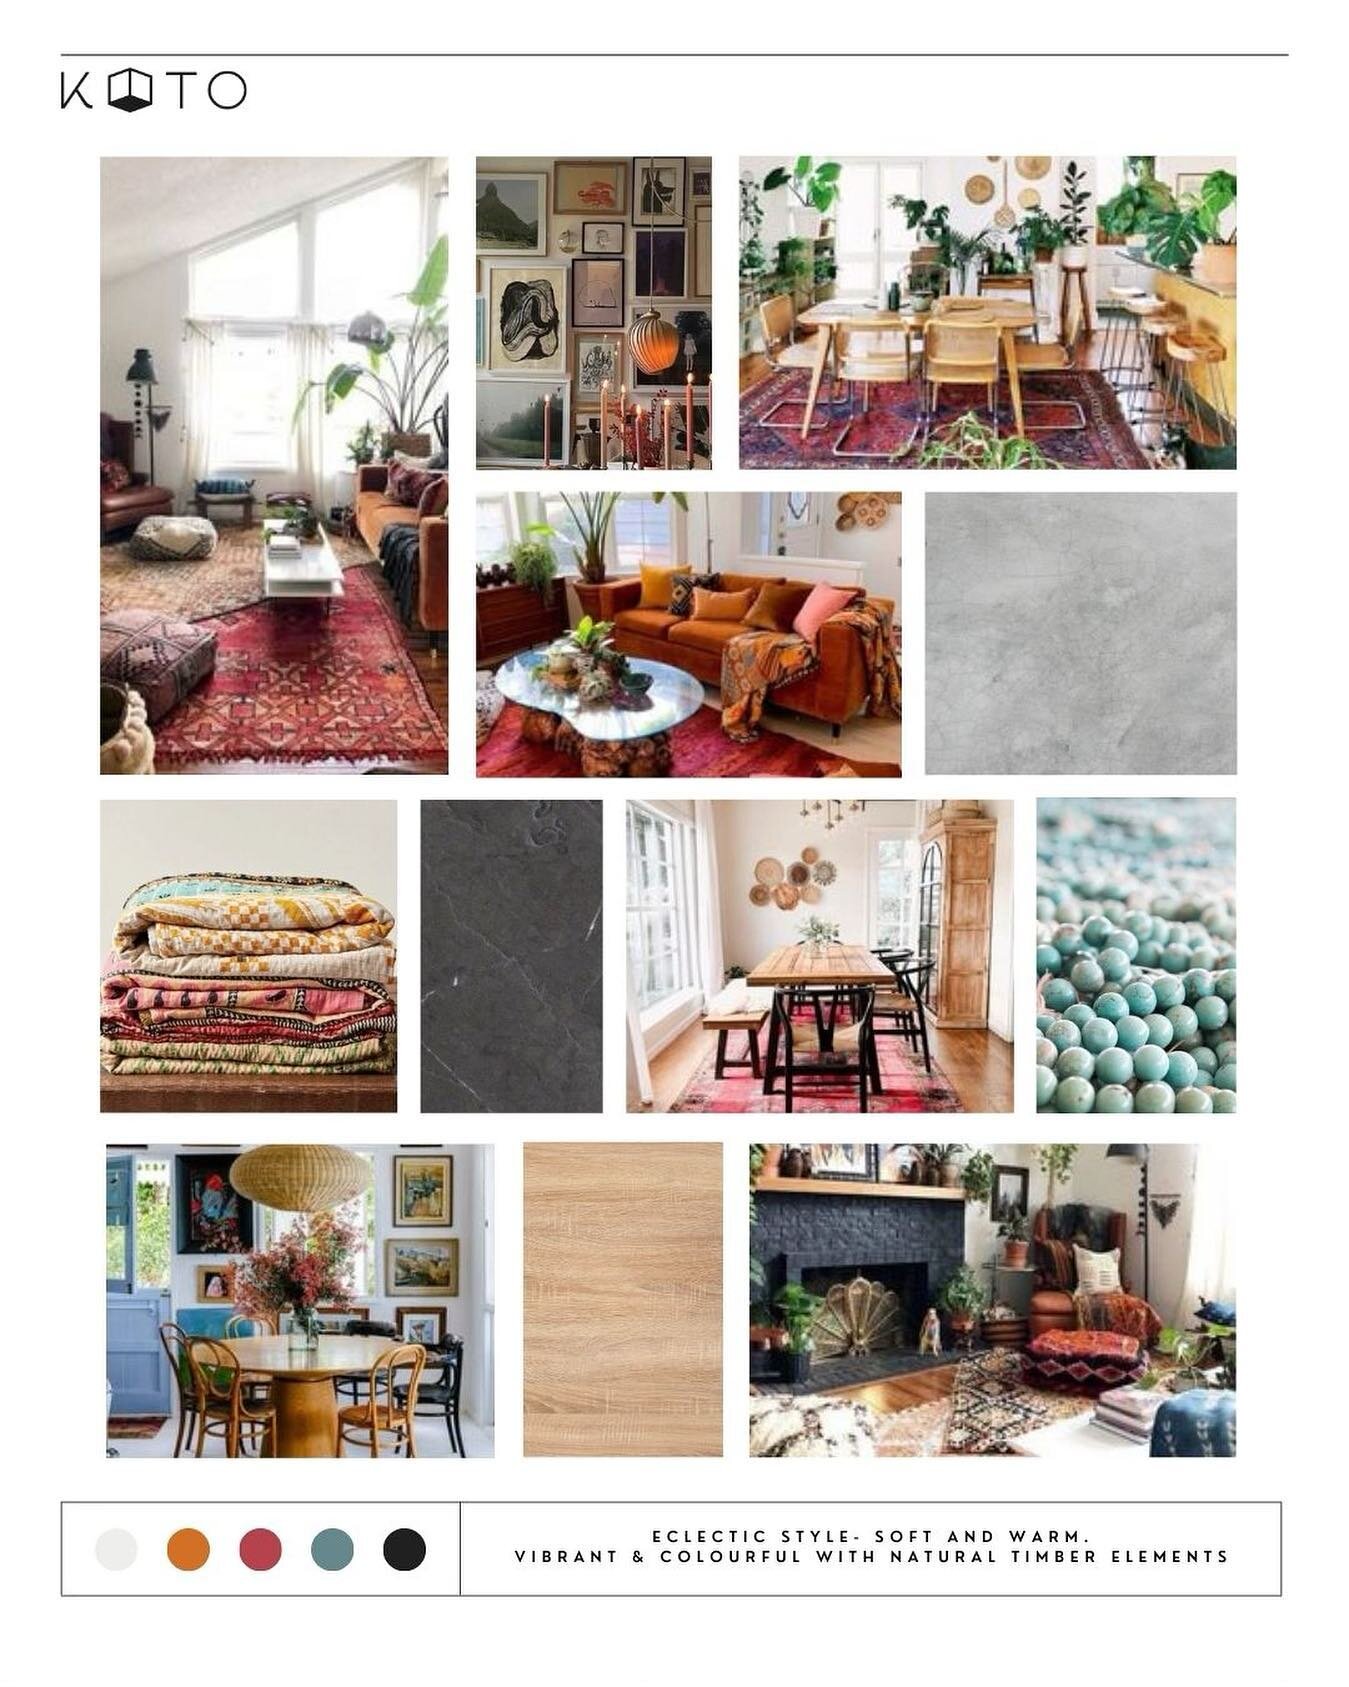 MOOD BOARD - Eclectic Warmth with a relaxing vibe ✨
 
The feel lighthearted, creative, and playful with a nod of nostalgia. 

Vibrant &amp; colourful with natural timber, timber,  wicker  and plants

Using a prominently neutral colour base with vibra